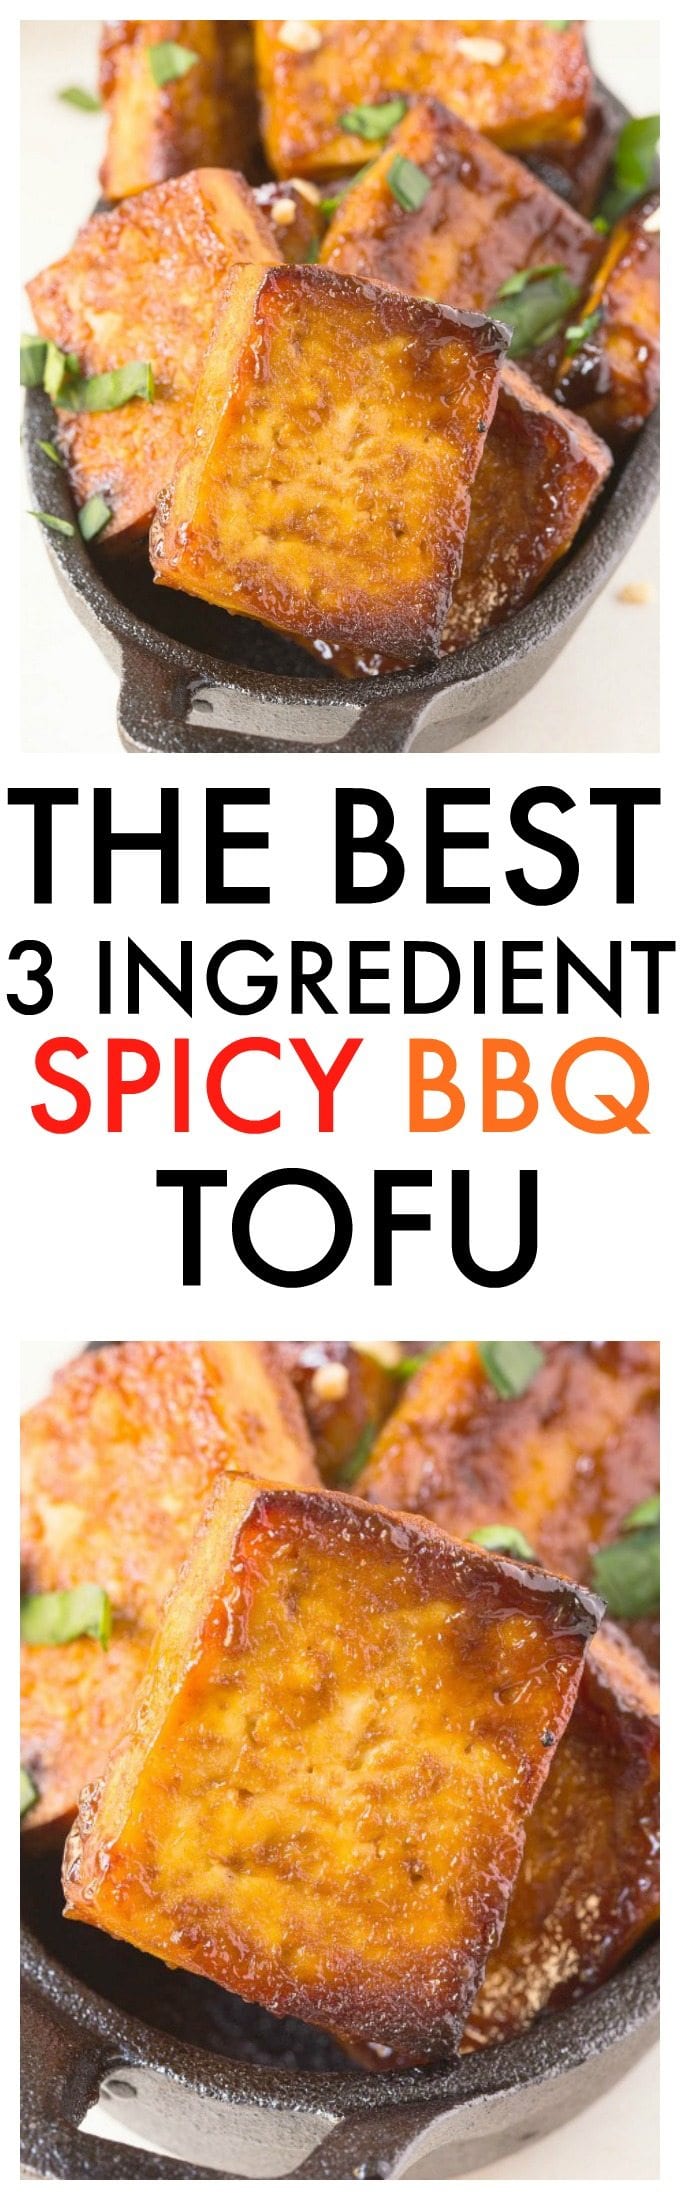 3 Ingredient Spicy BBQ Tofu recipe- Perfect grilled, baked or seared and the BEST Tofu recipe, even carnivores adore it! {vegan, gluten free, low carb recipe}- thebigmansworld.com